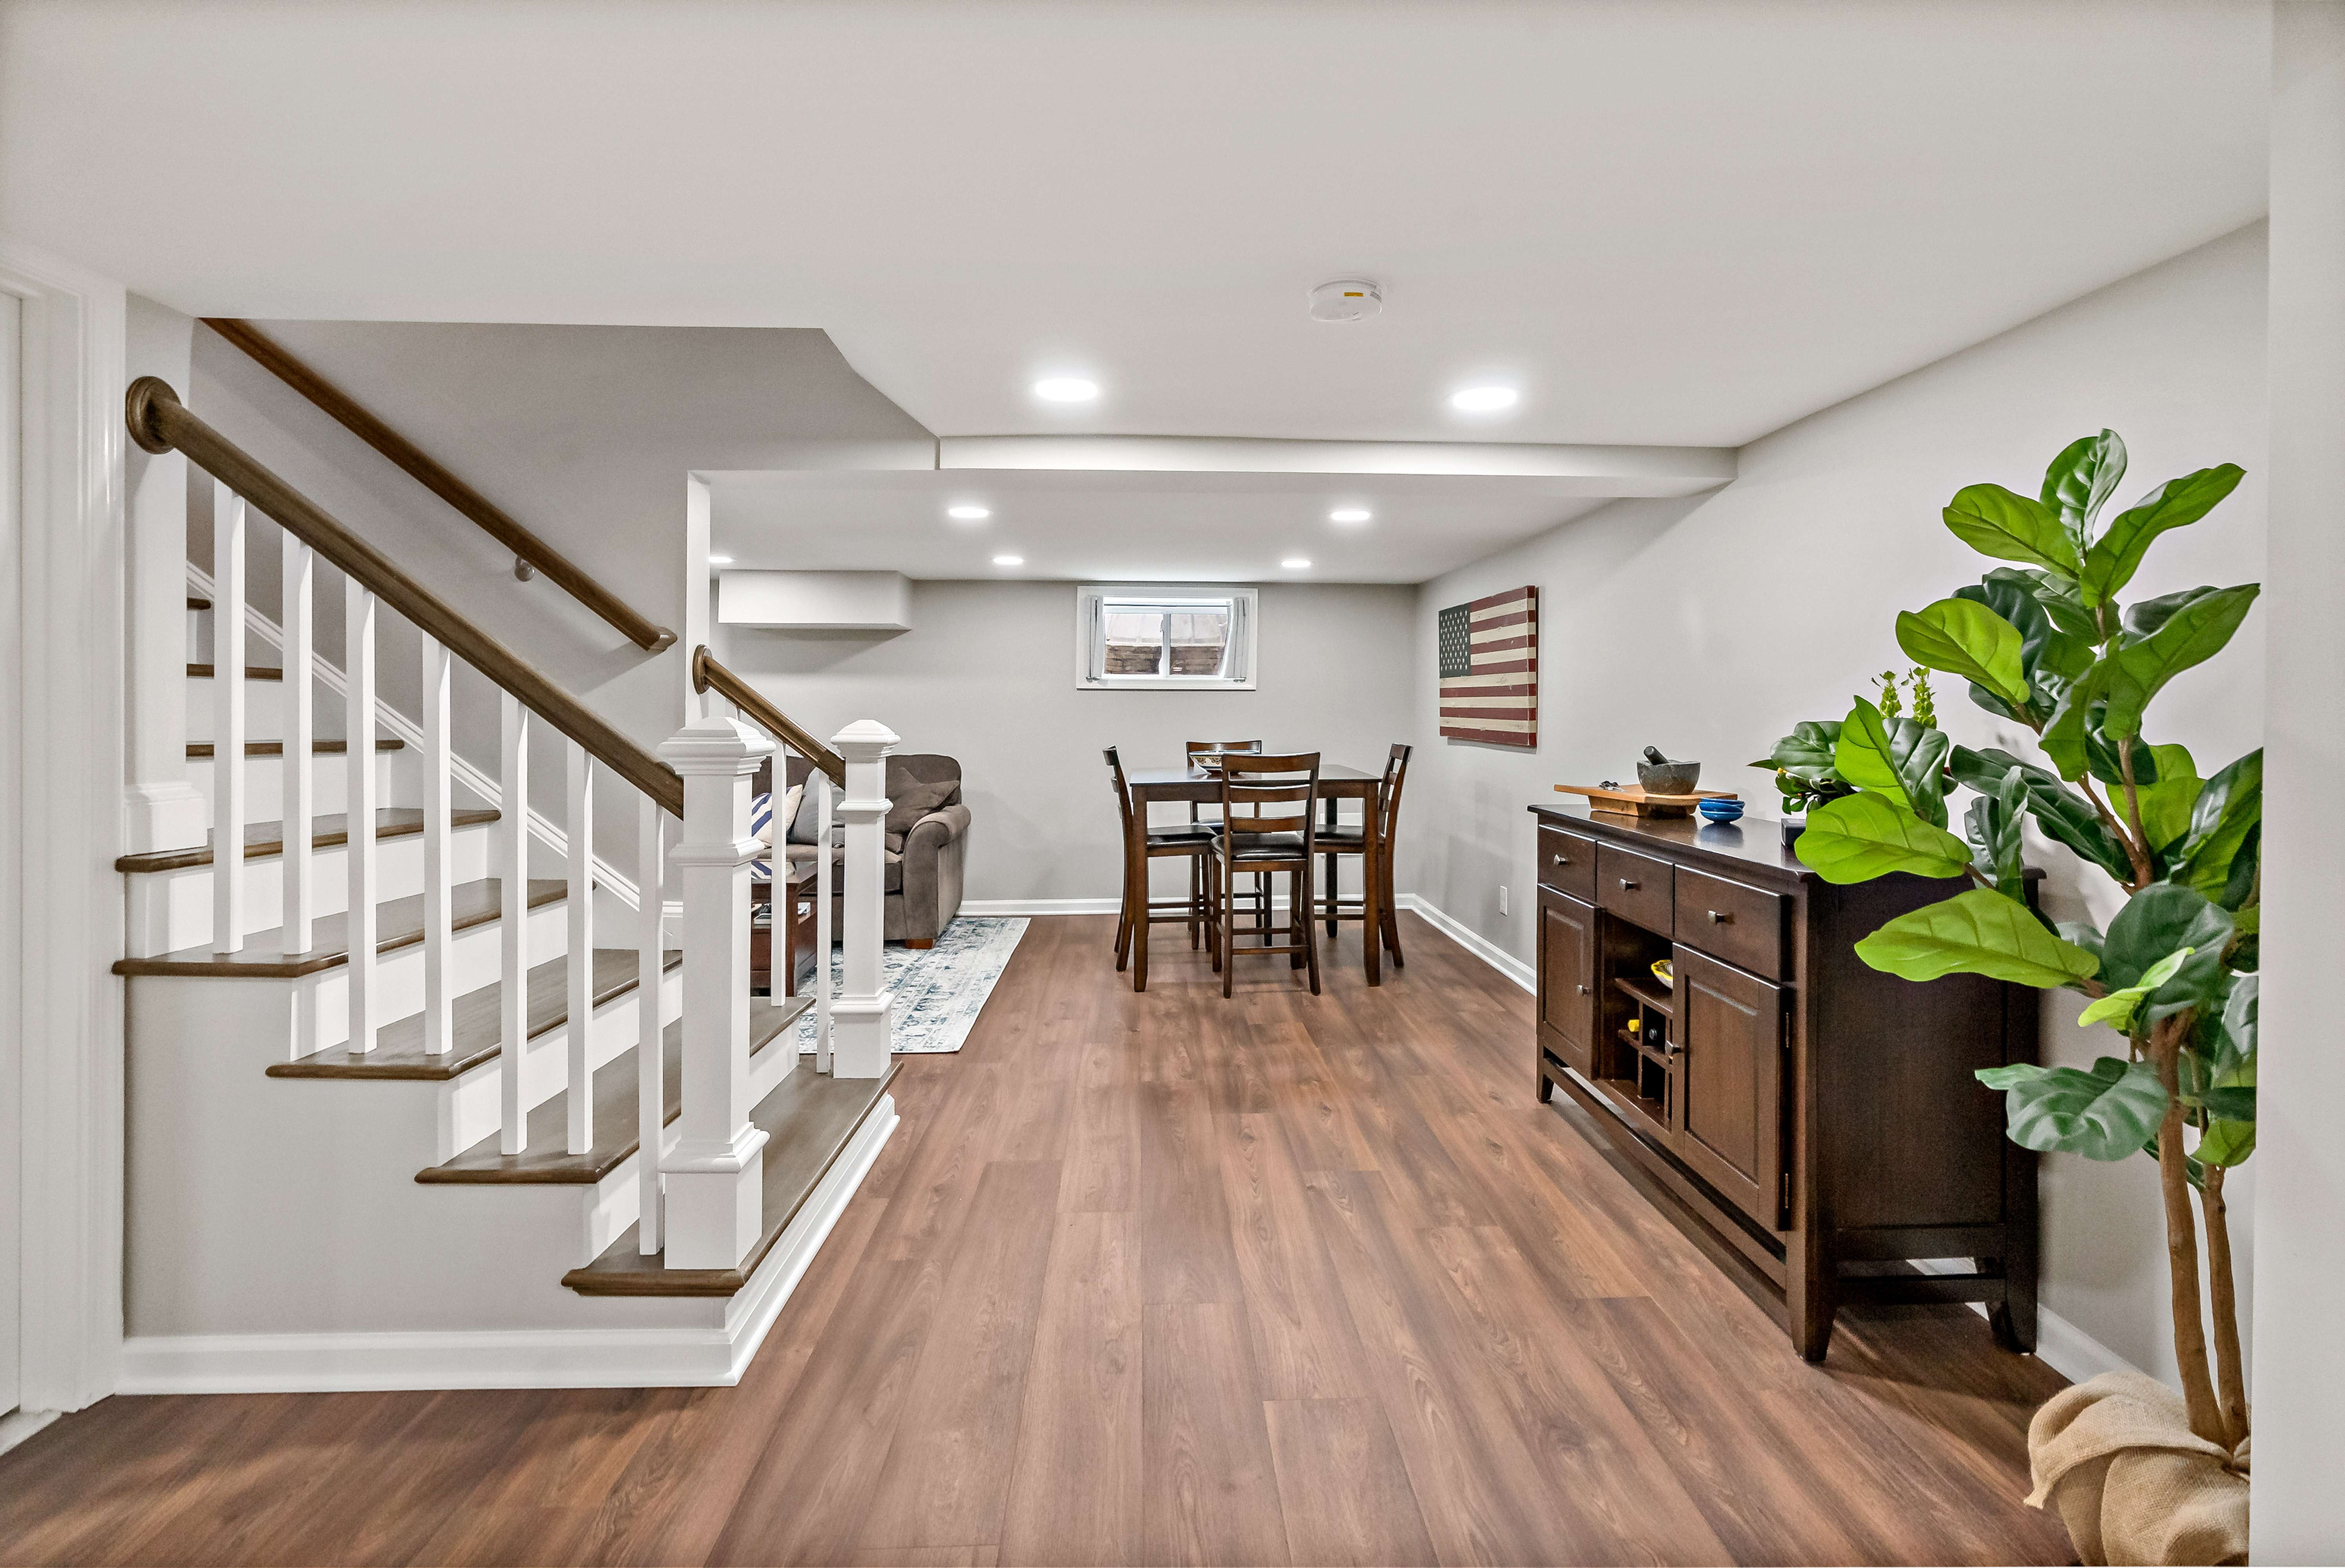 Basement Bliss: Remodeling Ideas for a Functional Lower-Level Space